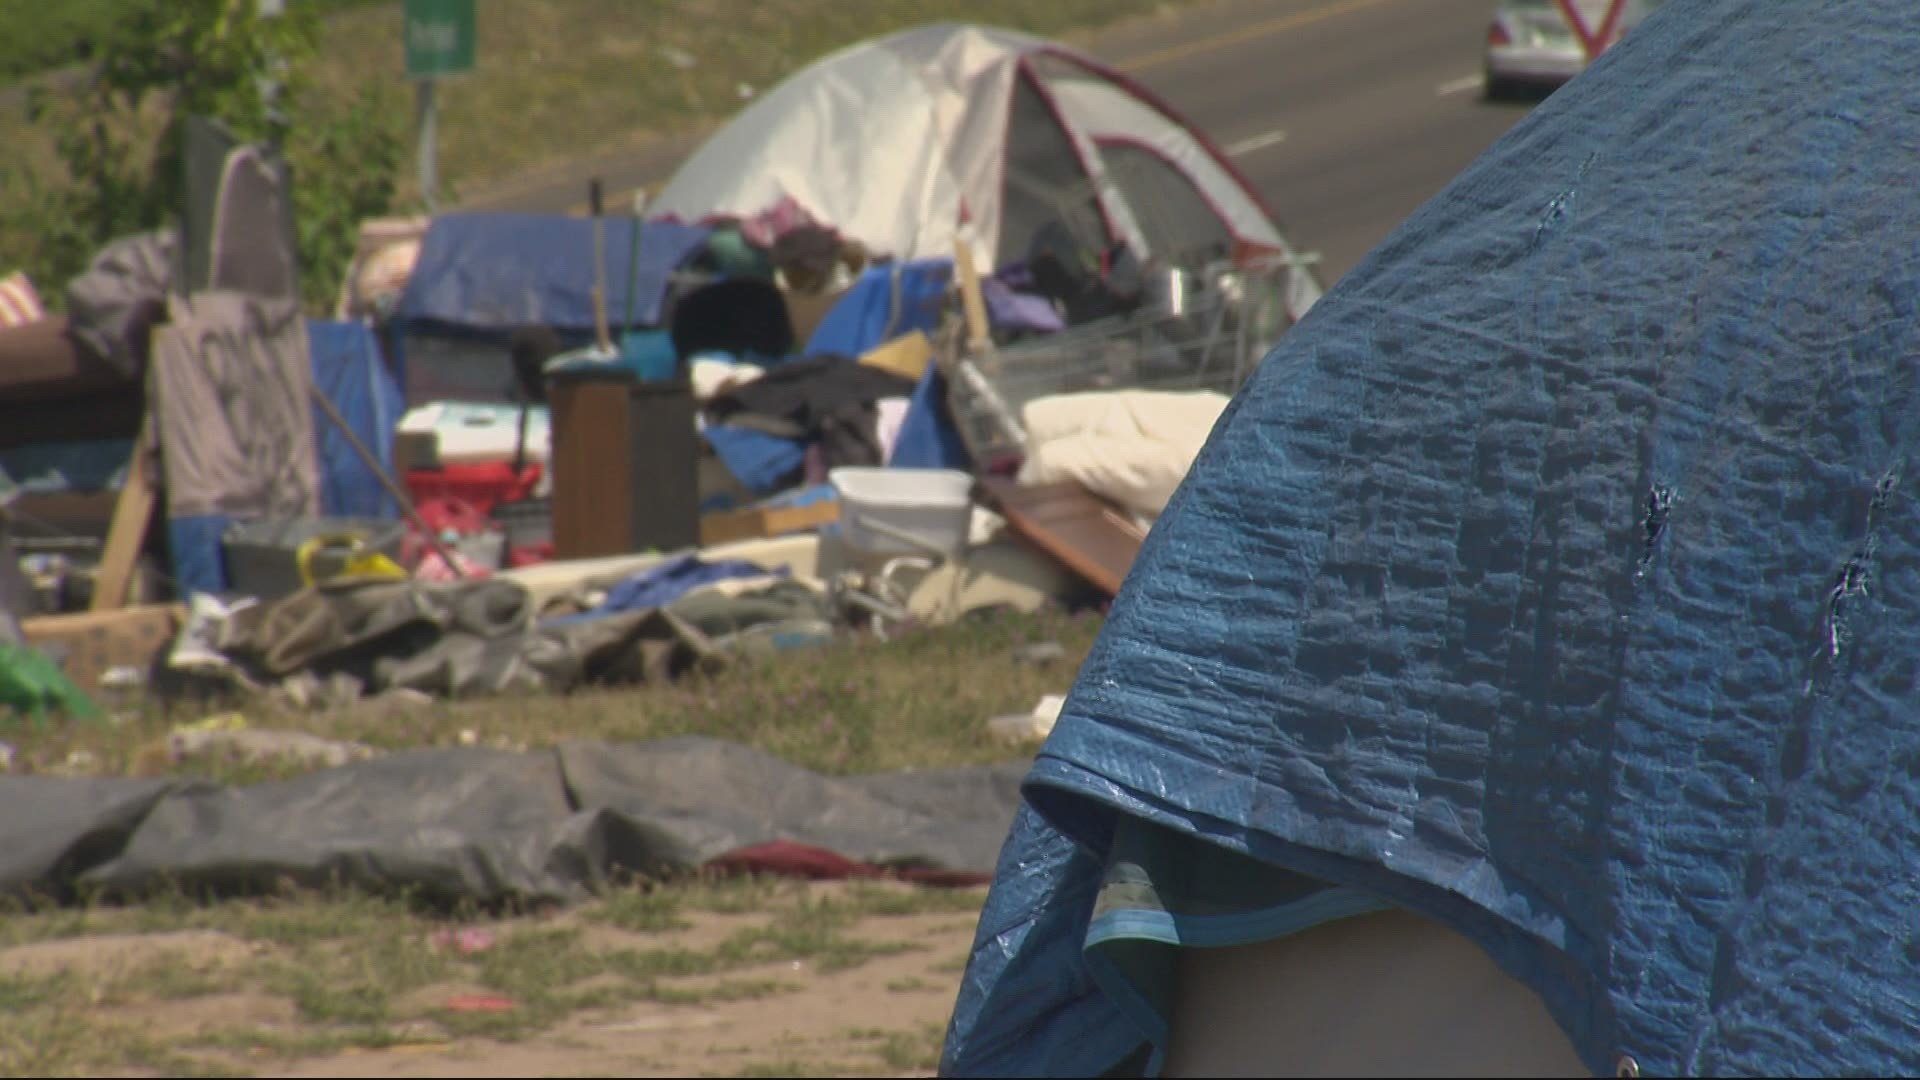 The city of Salem wants to pay businesses to provide space for a temporary shelter.